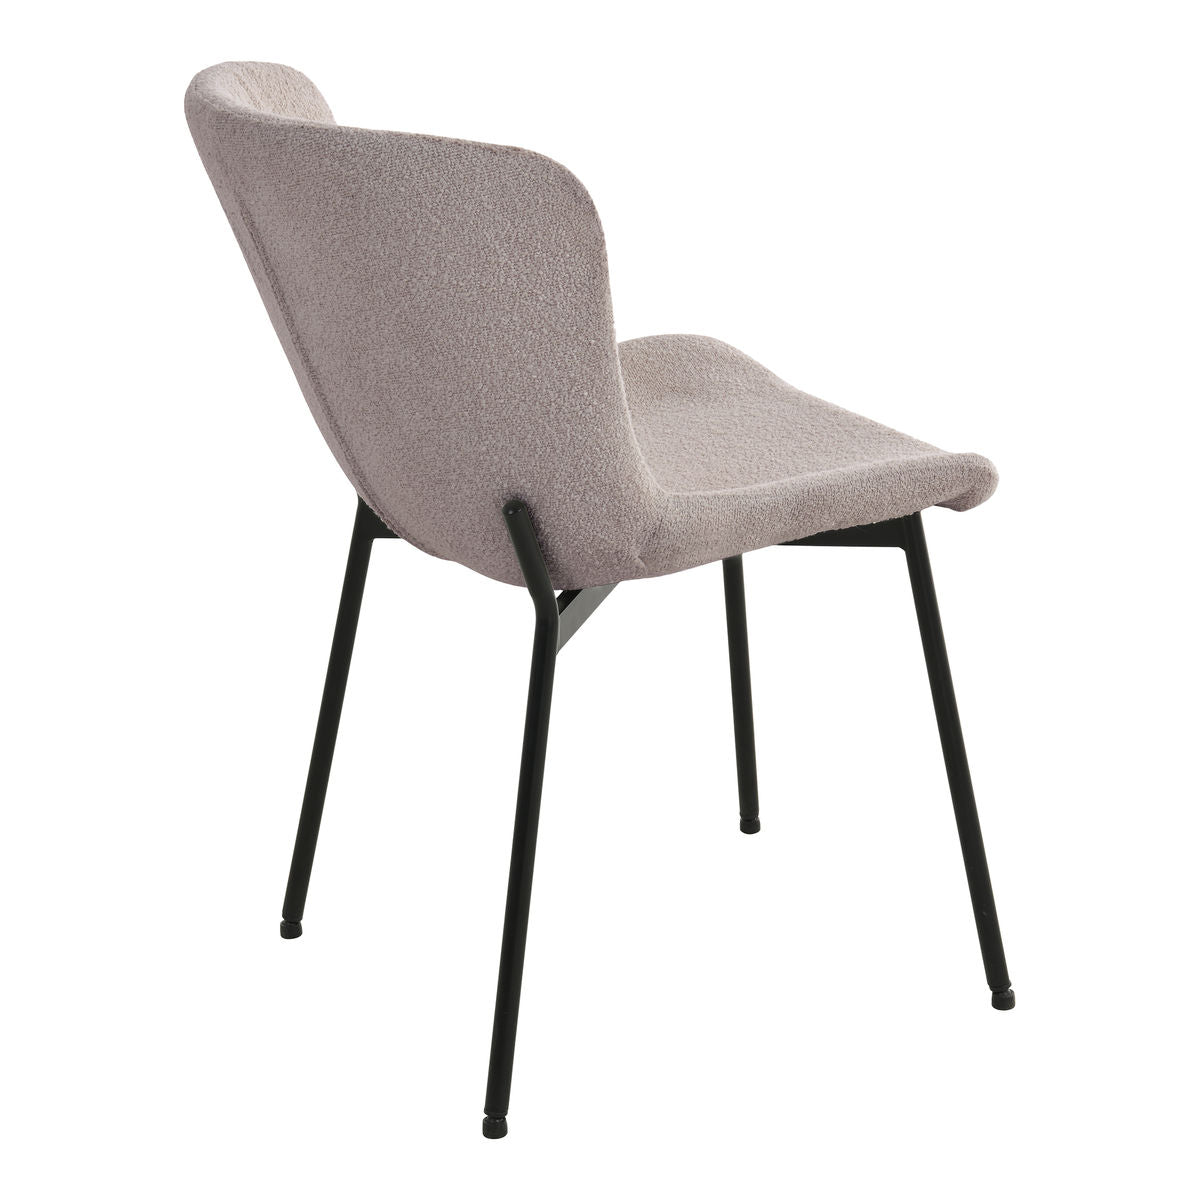 House Nordic Maceda Dining Chair - Set of 2